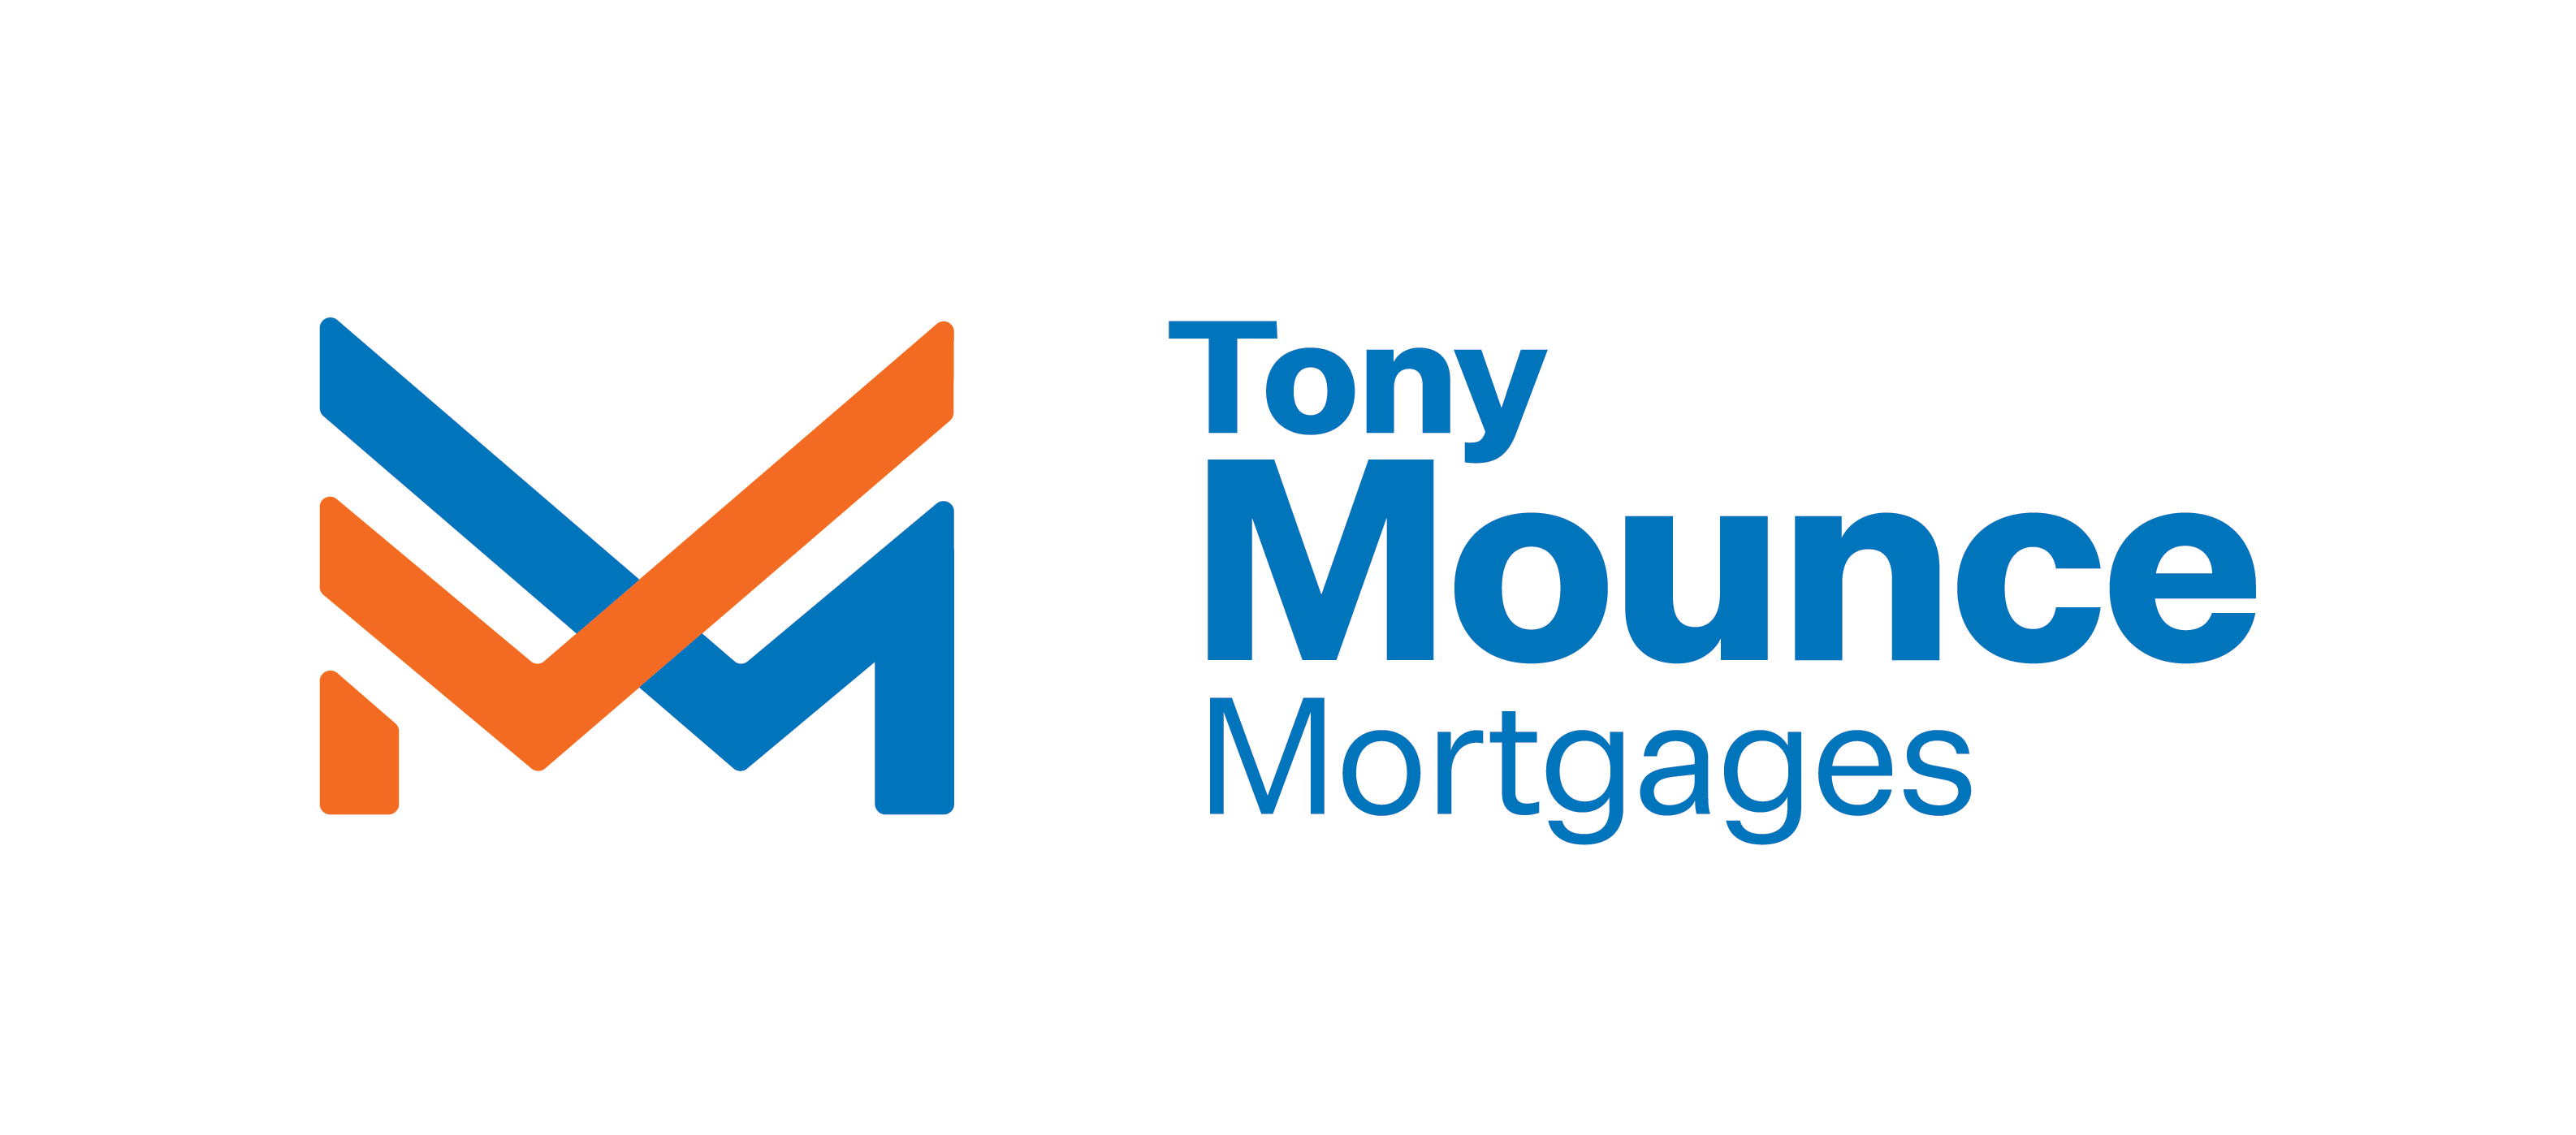 Tony Mounce Mortgages